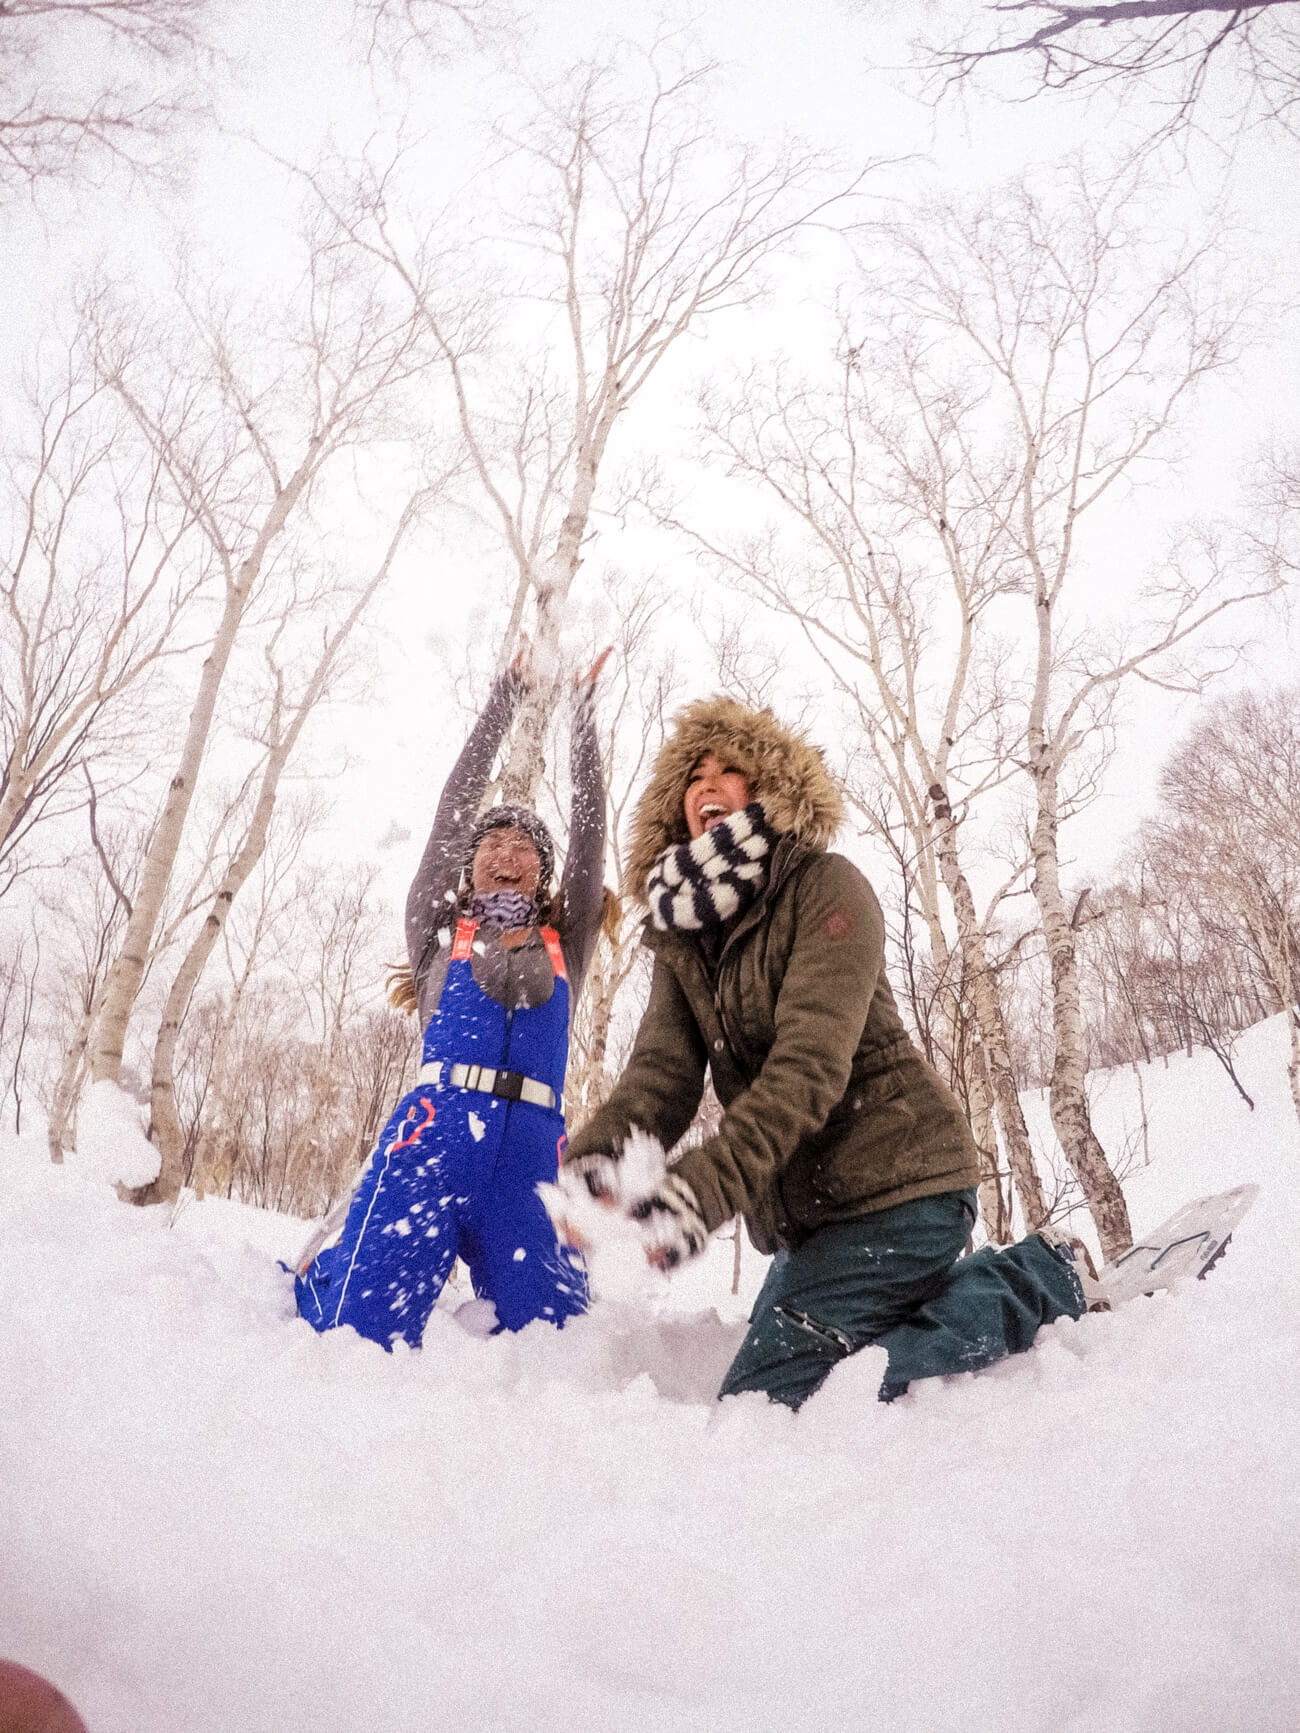 Skiing in Niseko, Japan with Ski Week | Where's Mollie? A Travel and Adventure Lifestyle Blog